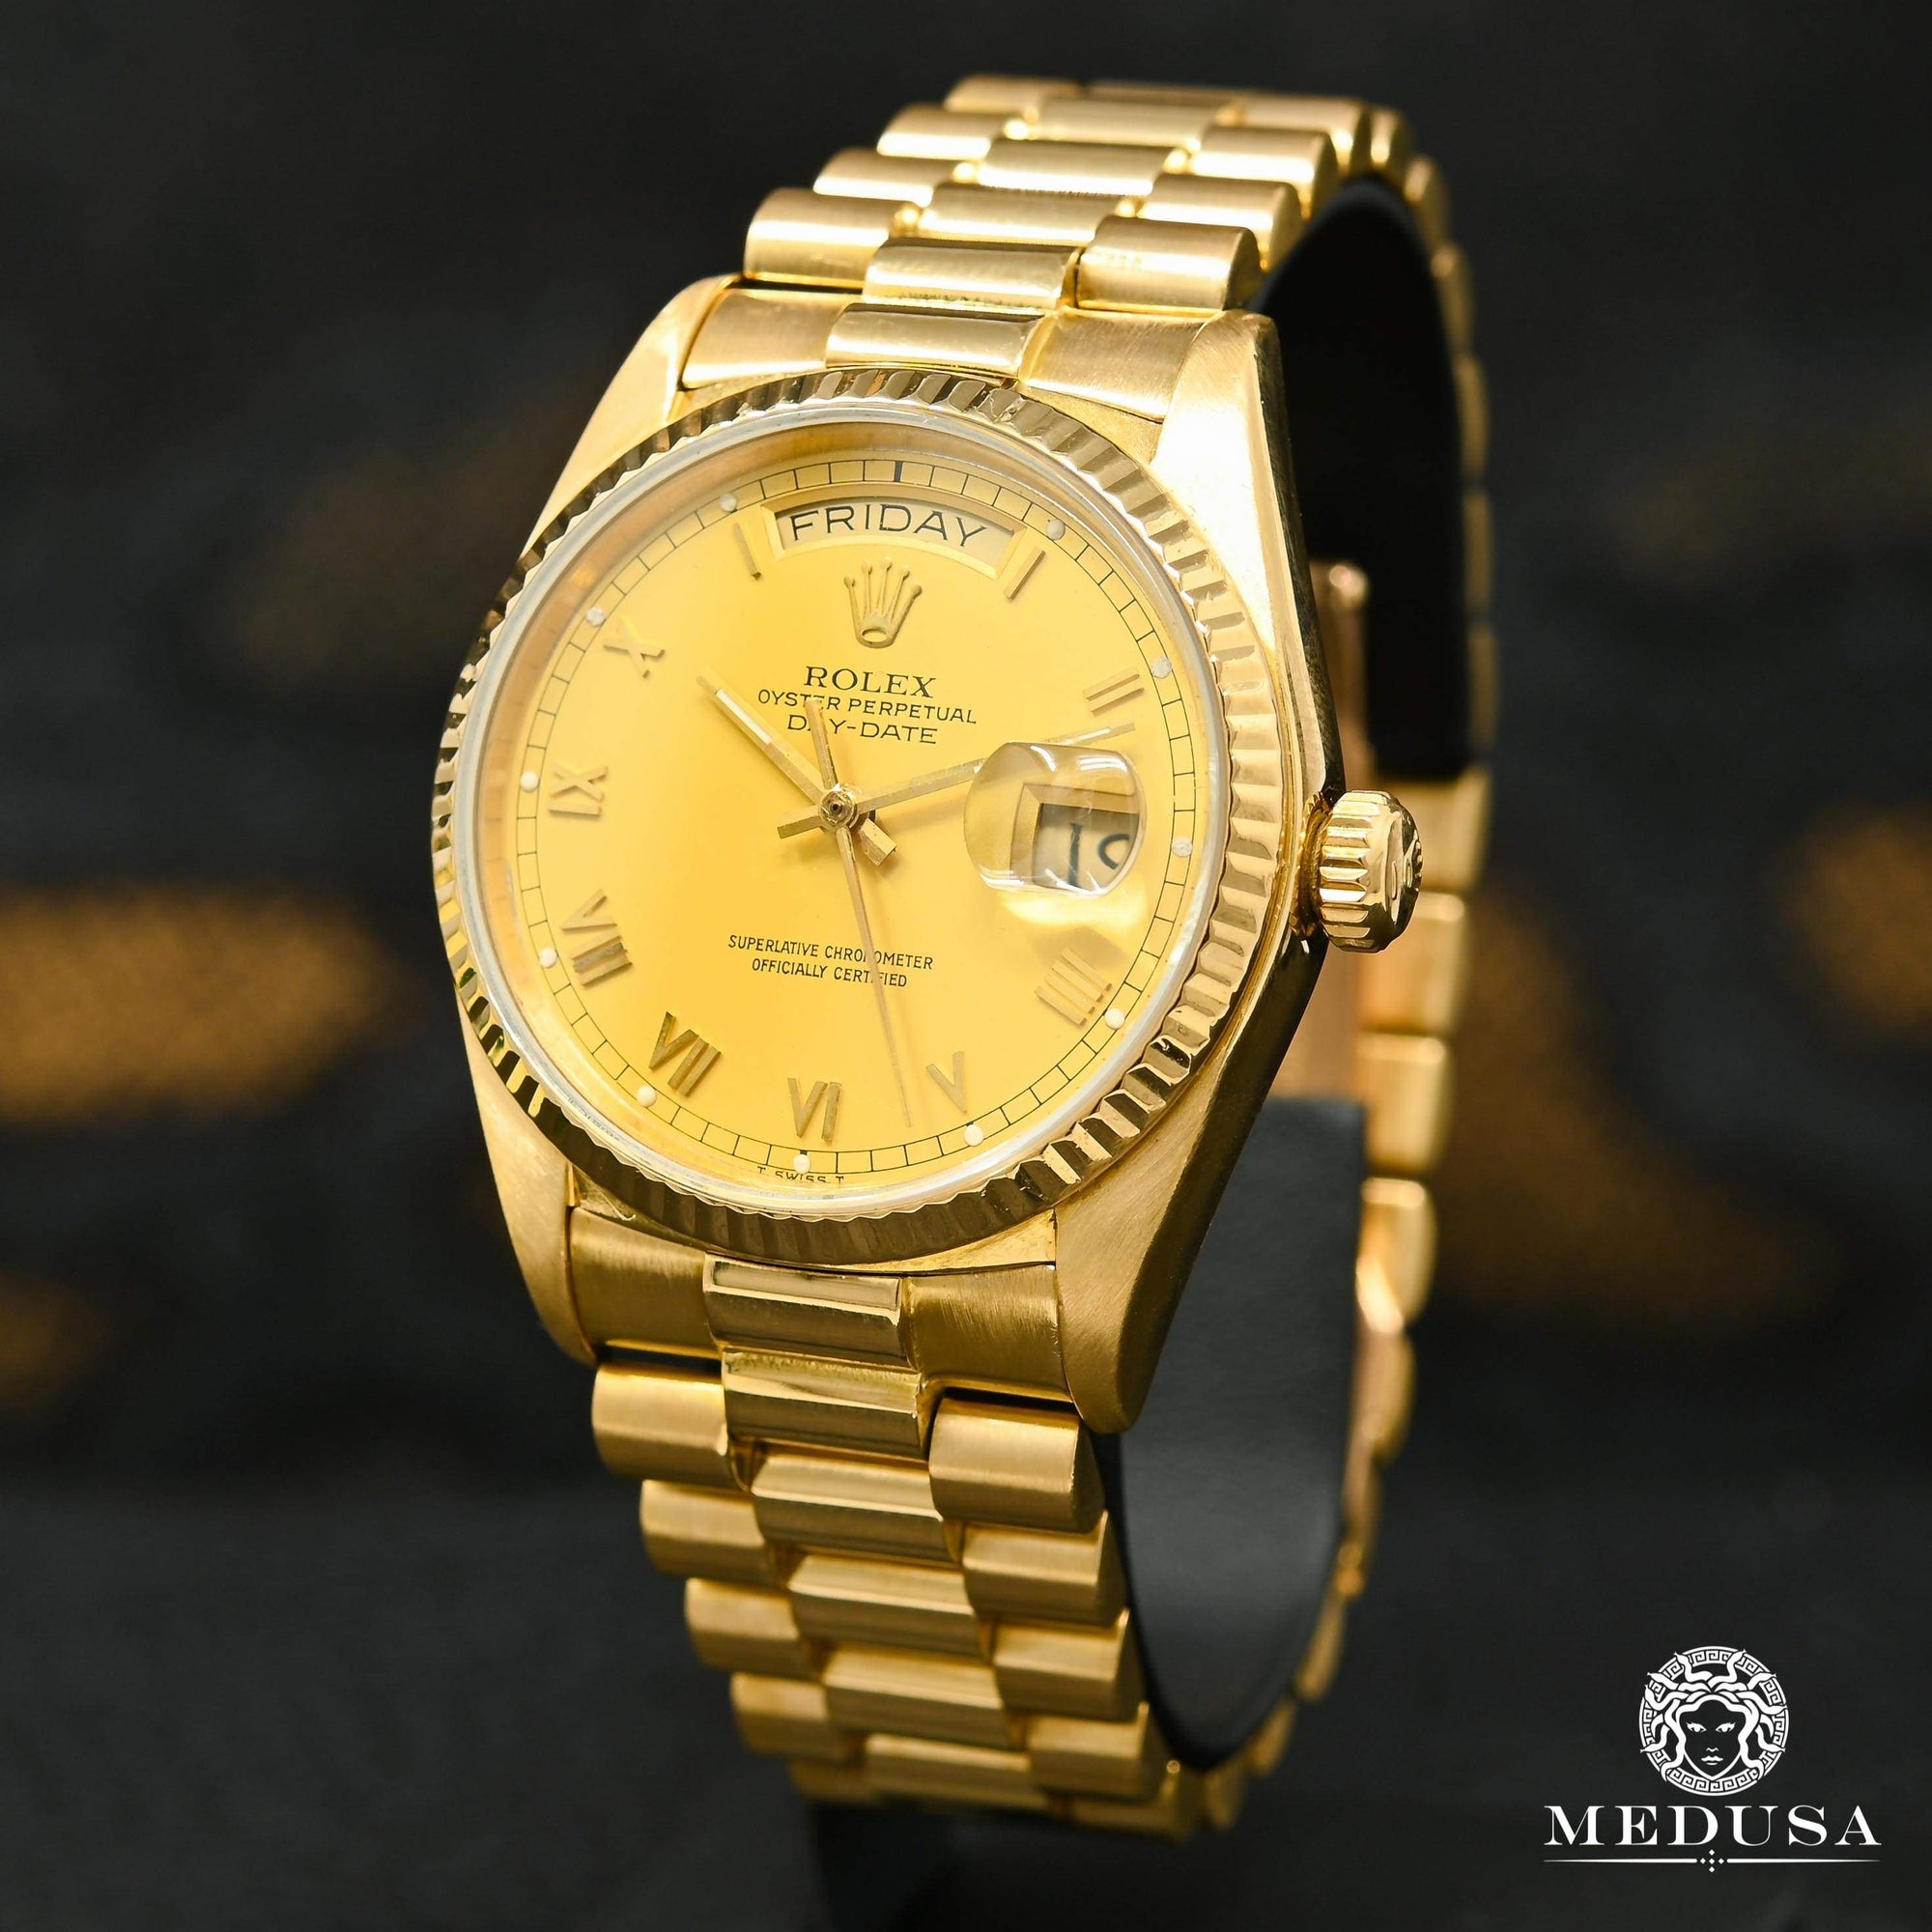 Montre Rolex | Montre Homme Rolex President Day-Date 36mm - Champagne Romain Or Jaune